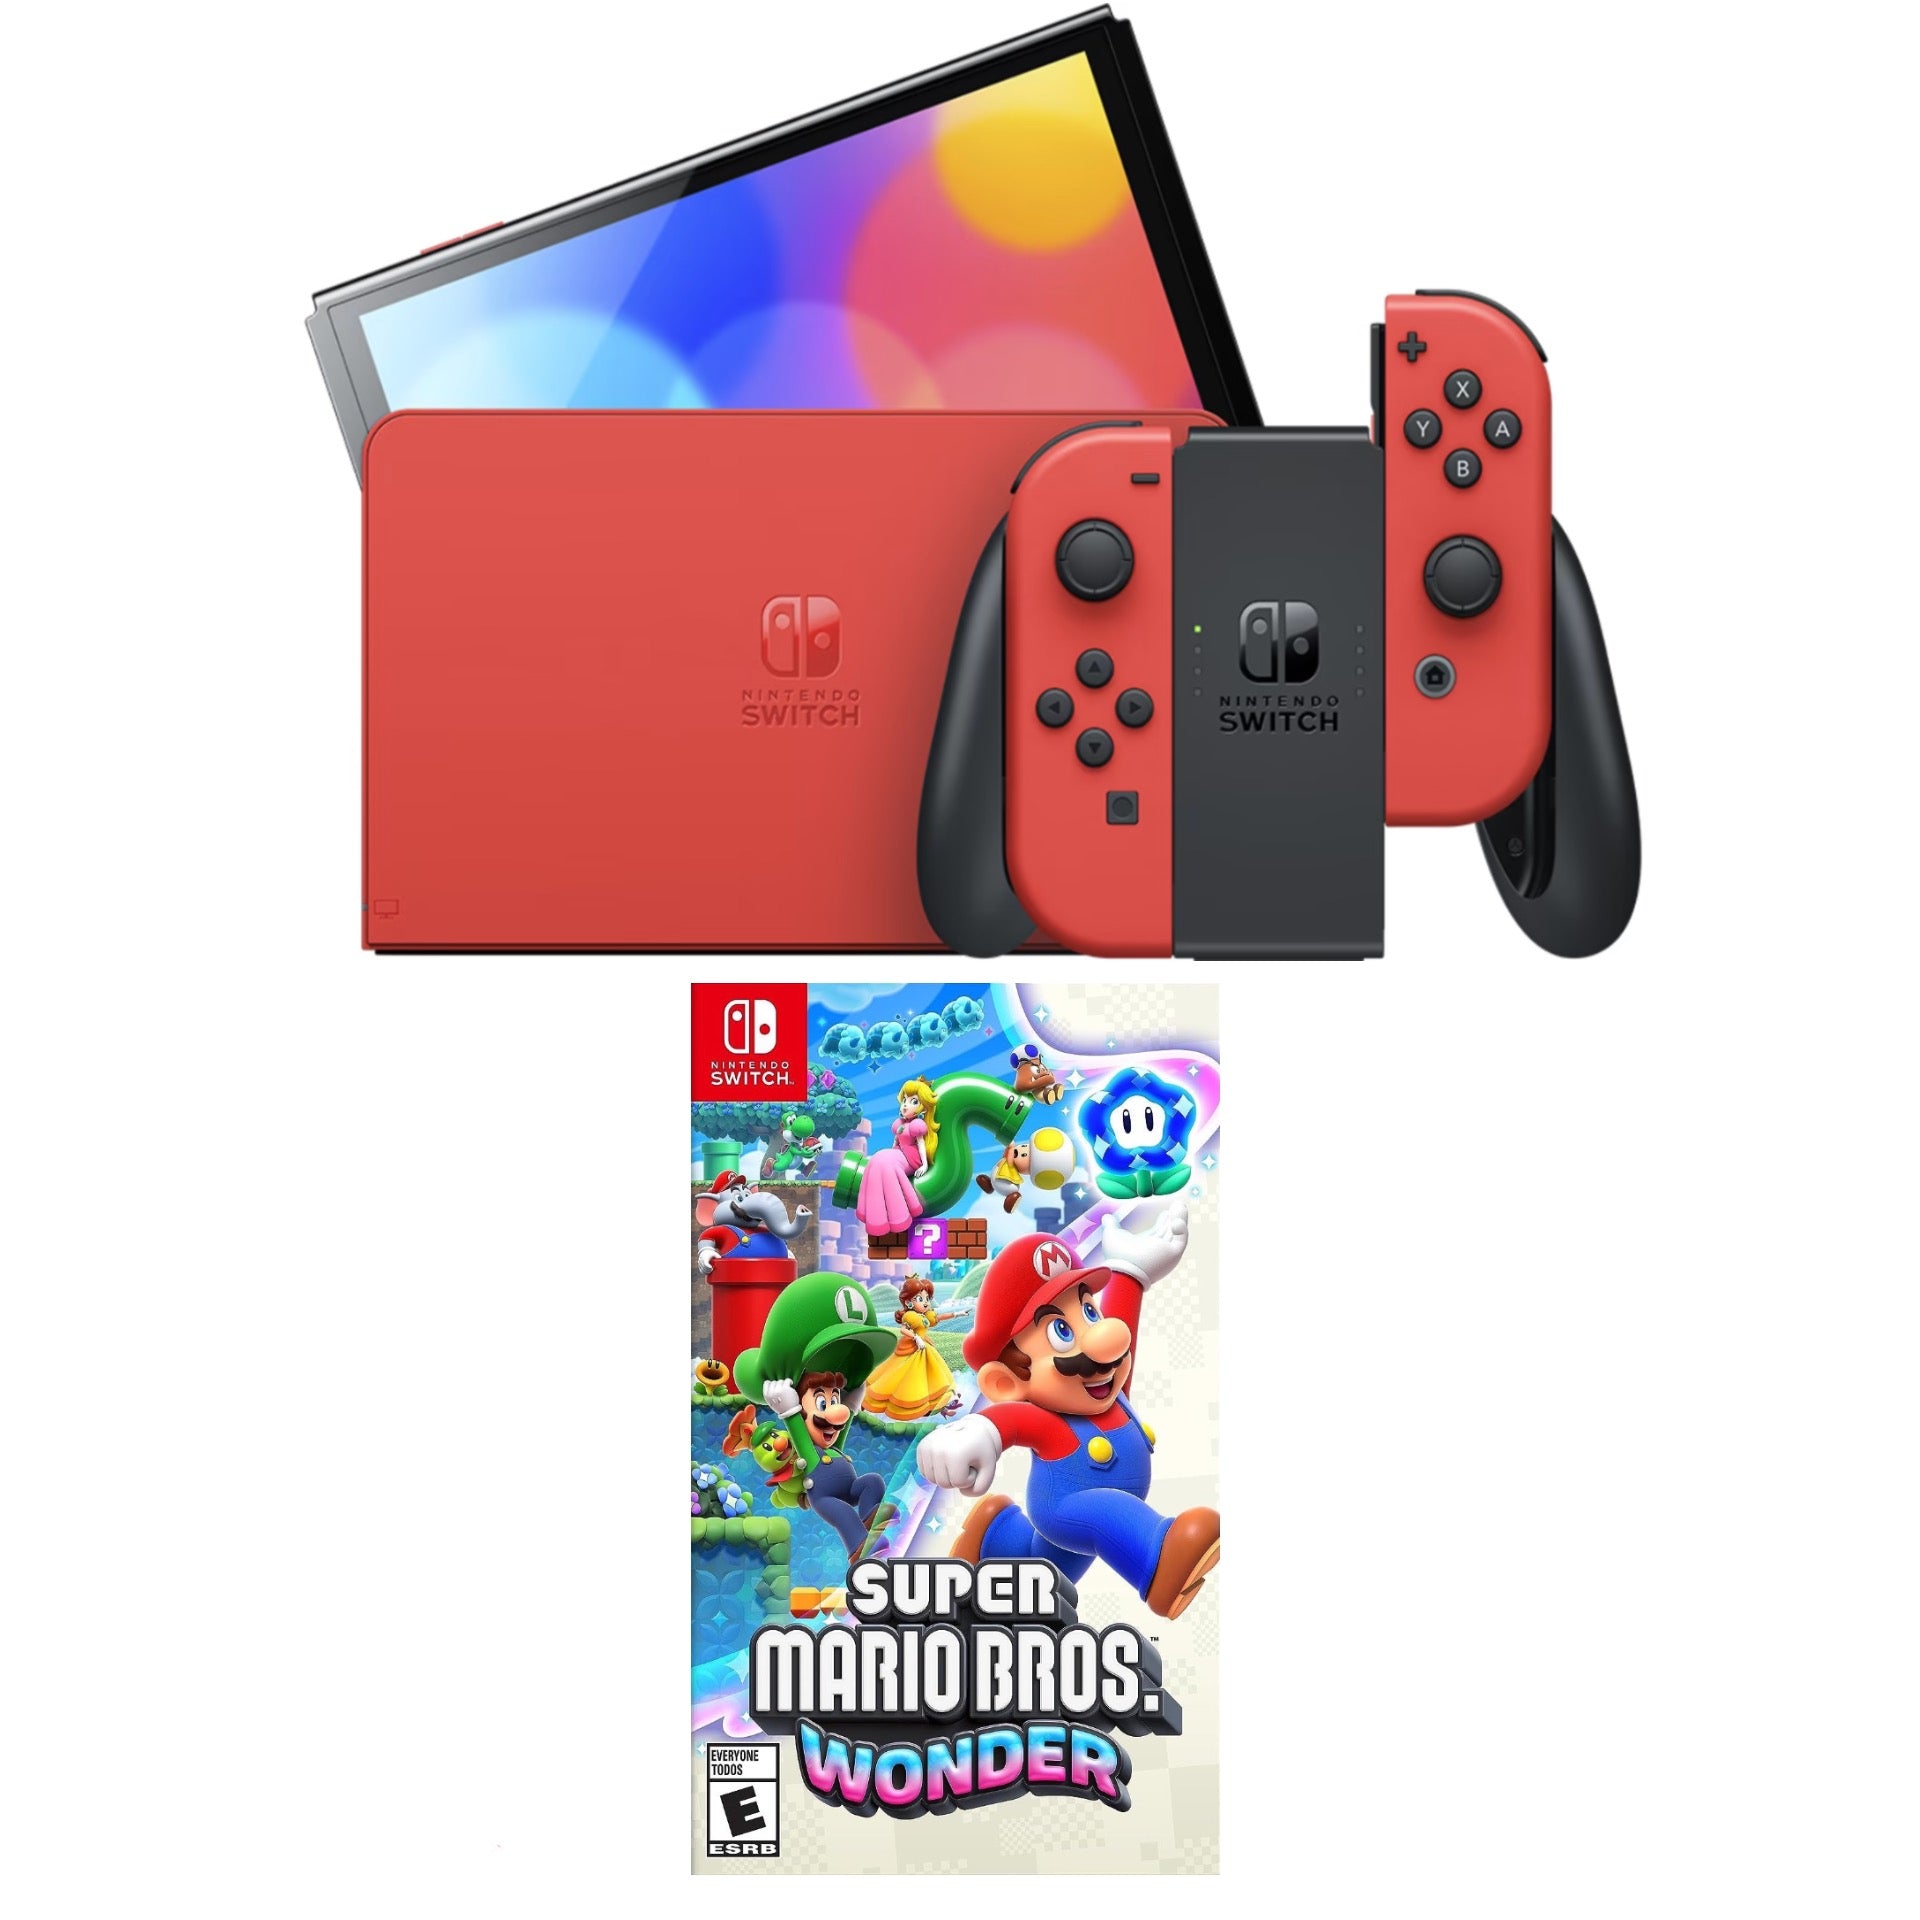 Where To Buy Nintendo Switch OLED Model - Mario Red Edition